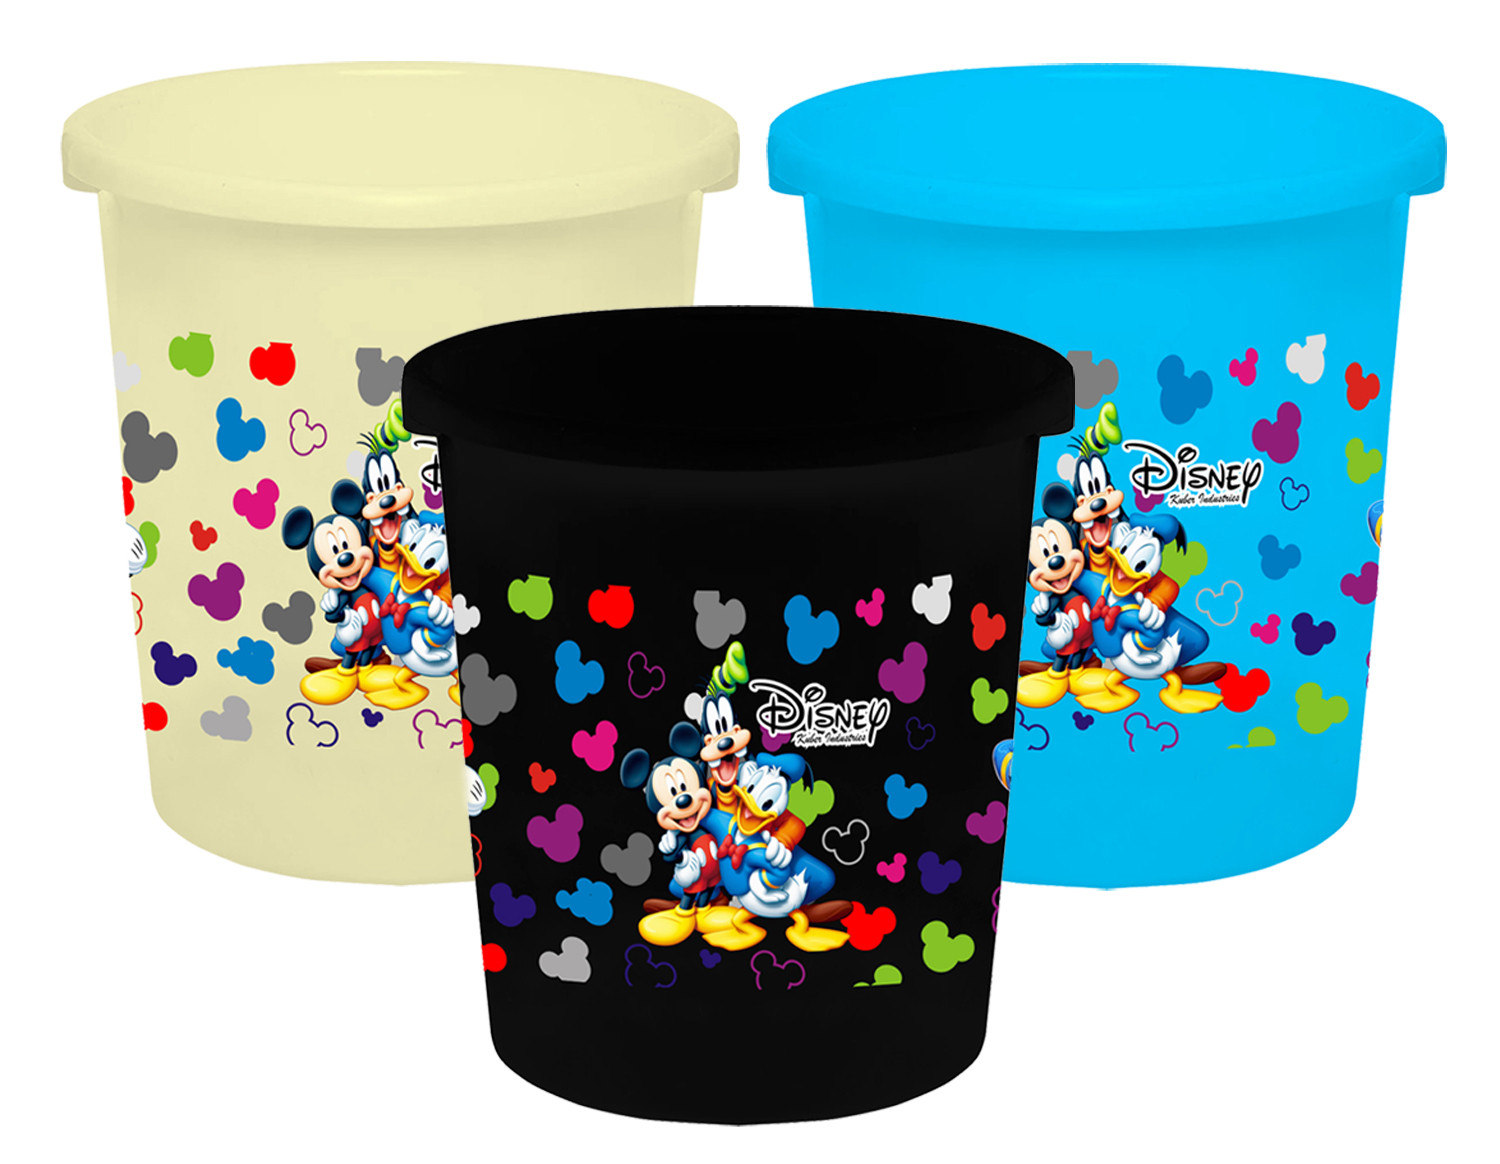 Kuber Industries Disney Team Mickey Print Plastic 3 Pieces Garbage Waste Dustbin/Recycling Bin for Home, Office, Factory, 5 Liters (Cream & Blue & Black) -HS_35_KUBMART17371